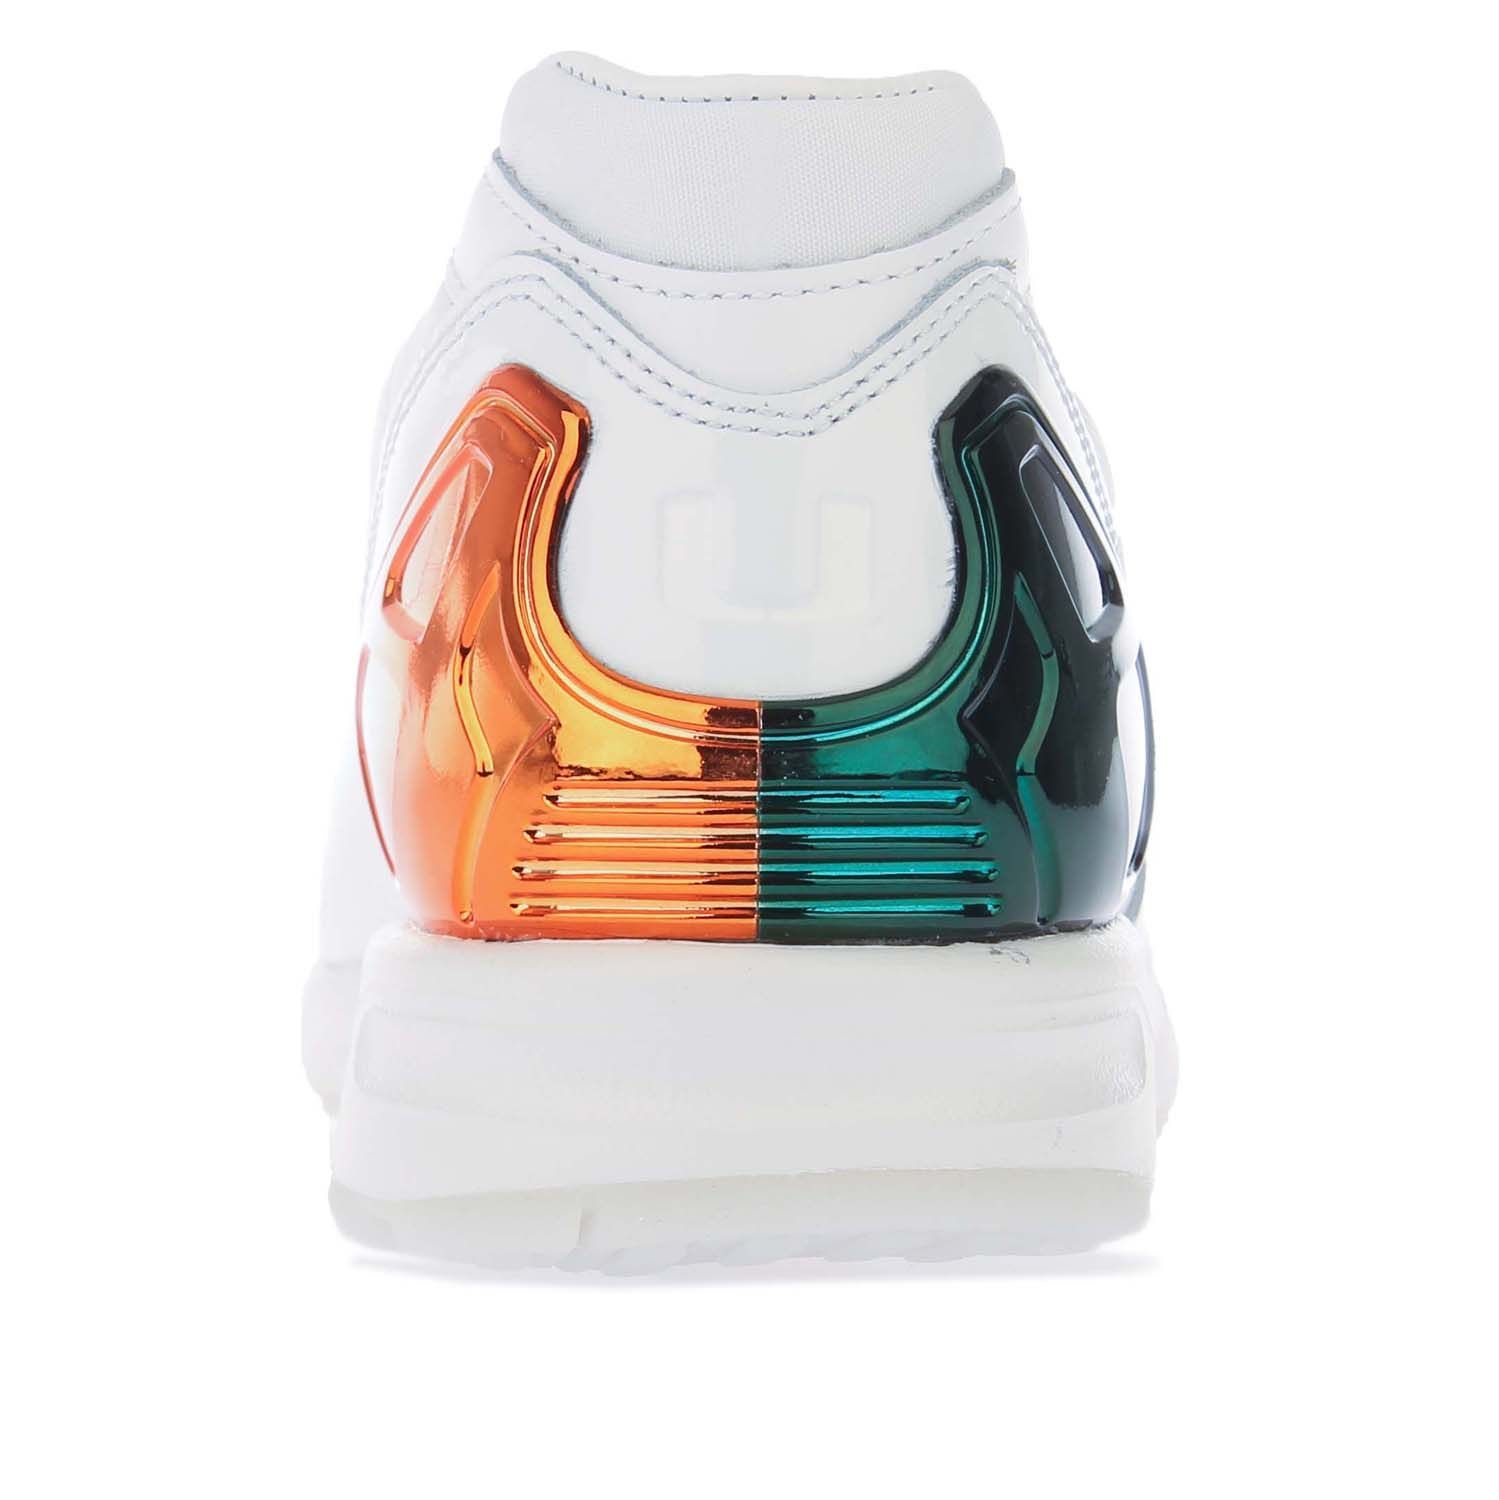 Mens adidas Originals ZX 5000 University of Miami ( The U ) Trainers in white.- Leather upper.- Lace up fastening.- Designed in orange  green and white to represent the legacy of the Miami Hurricanes.- Rubber sole.- Leather upper and Leather lining.- Ref.: FZ4416